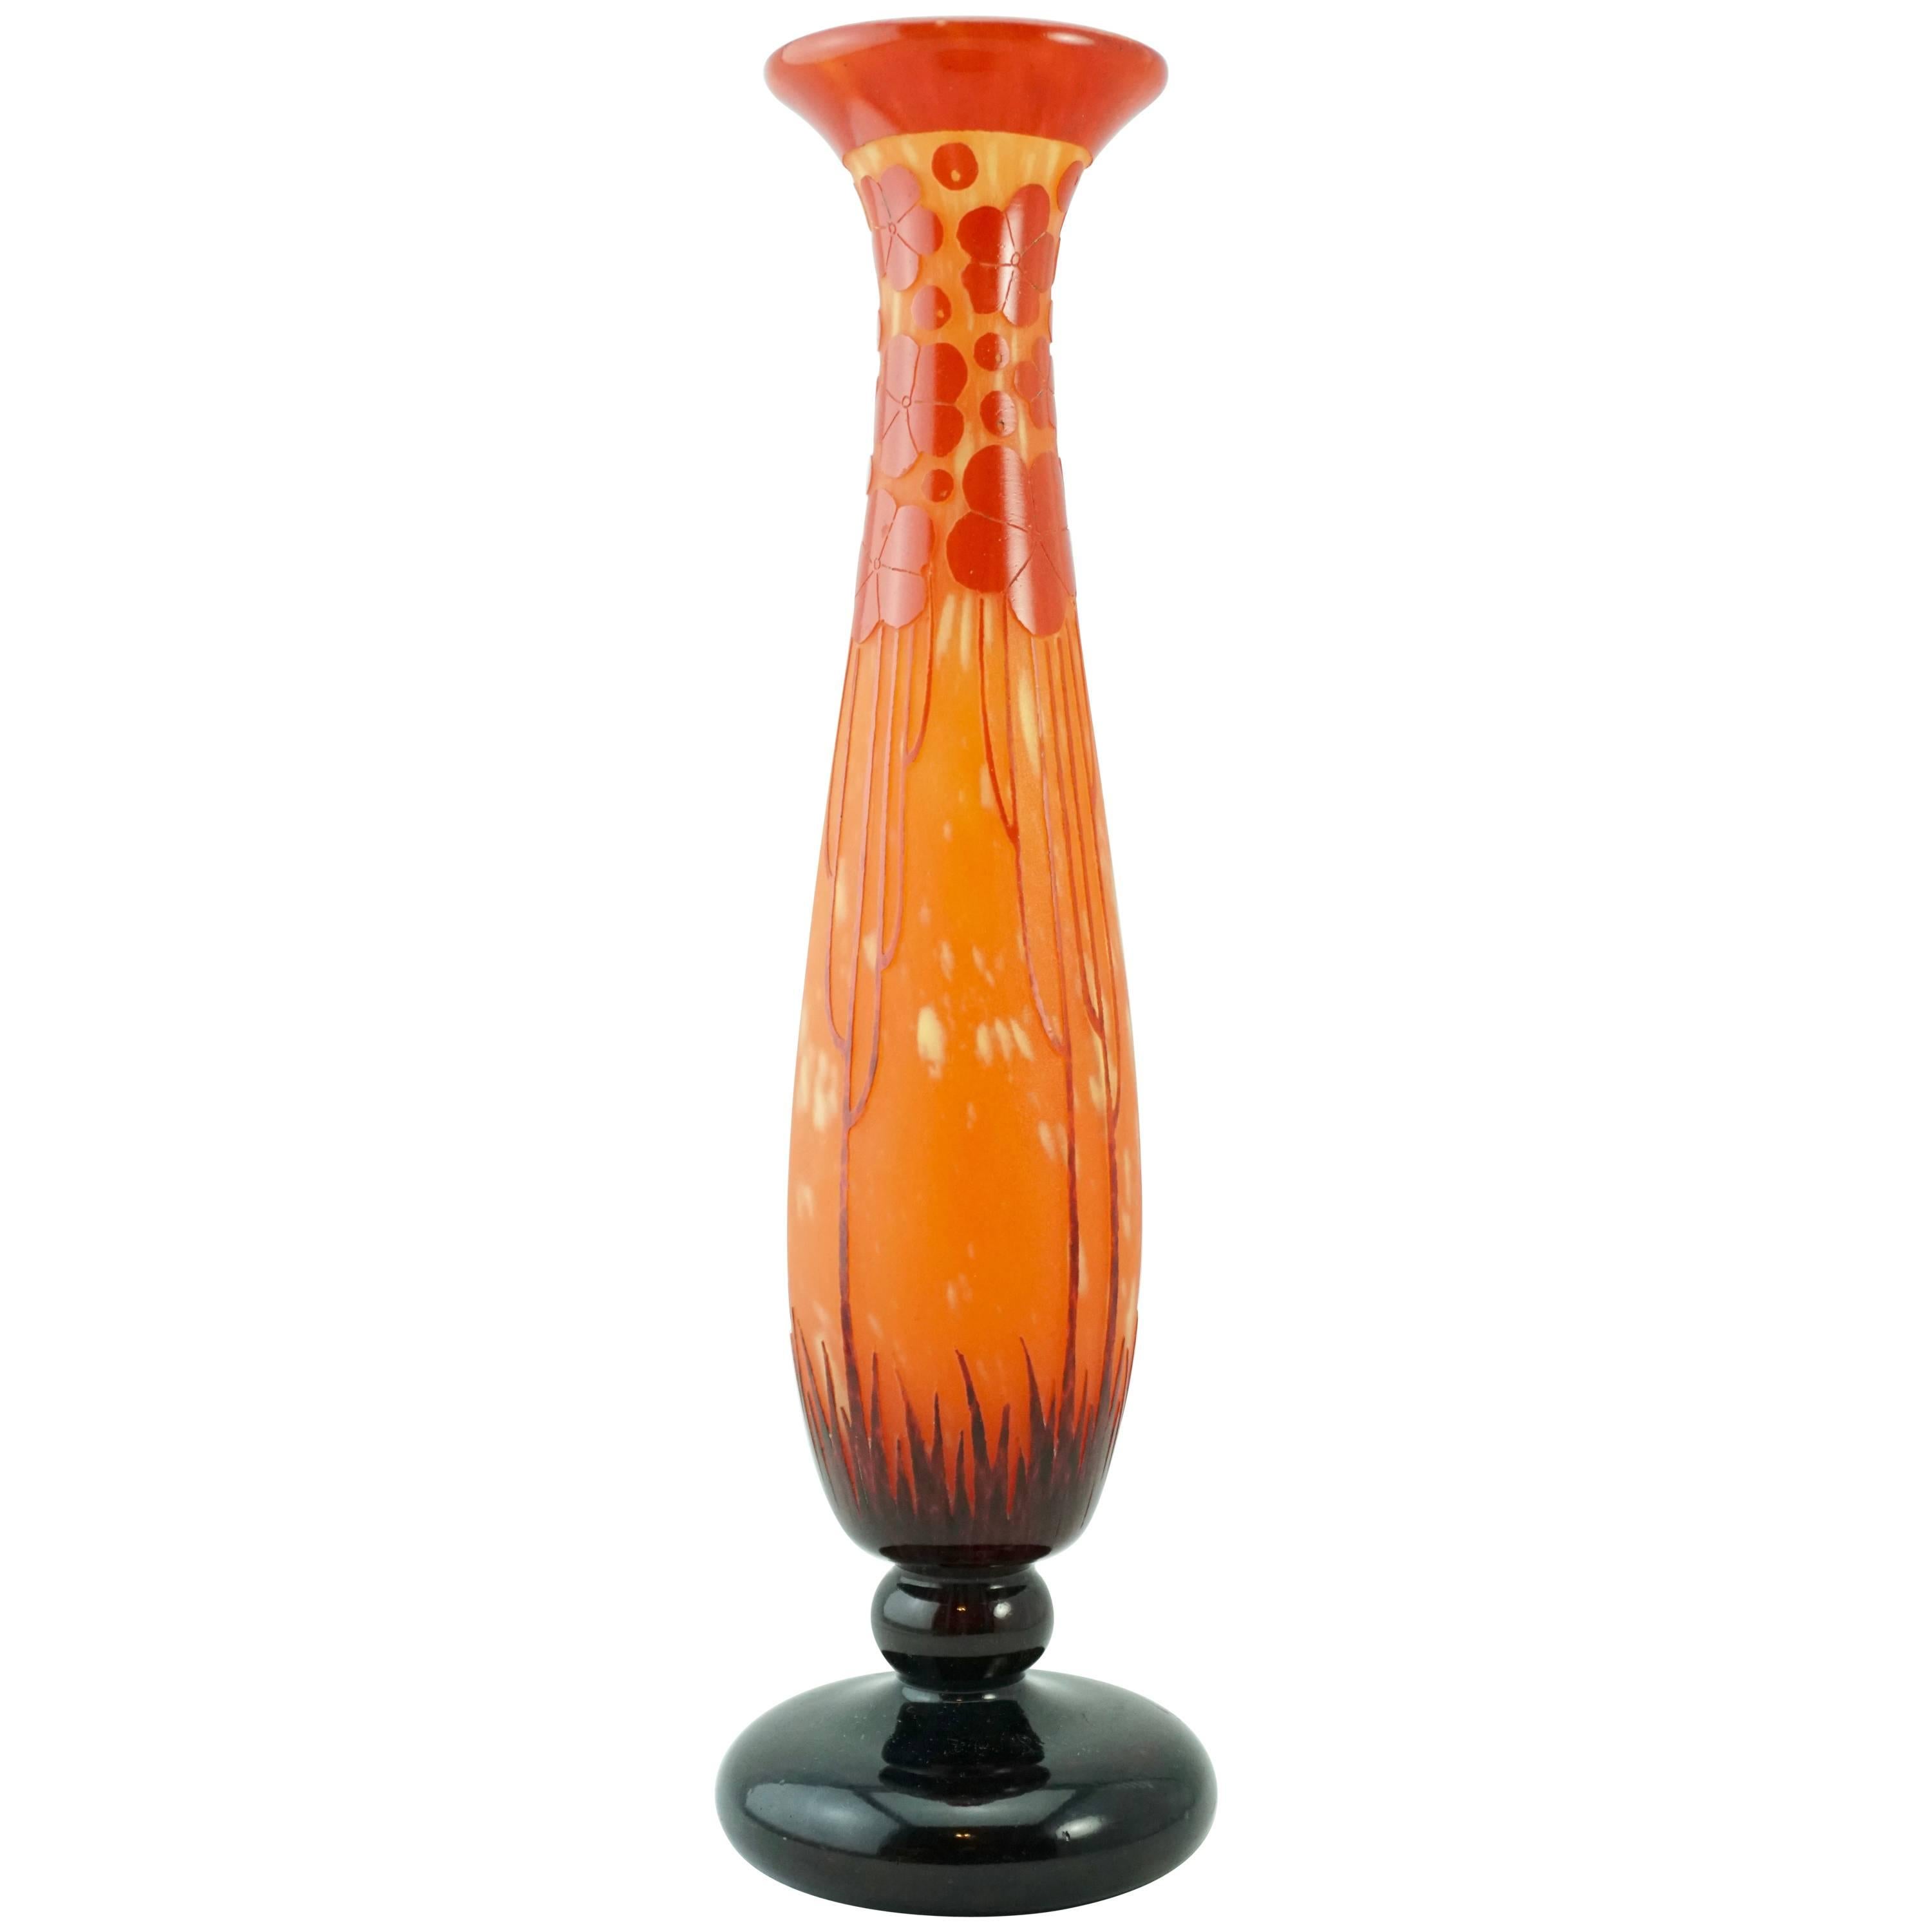 Charles Schneider Le Verre Francais Cardemines Rote Kamee-Vase